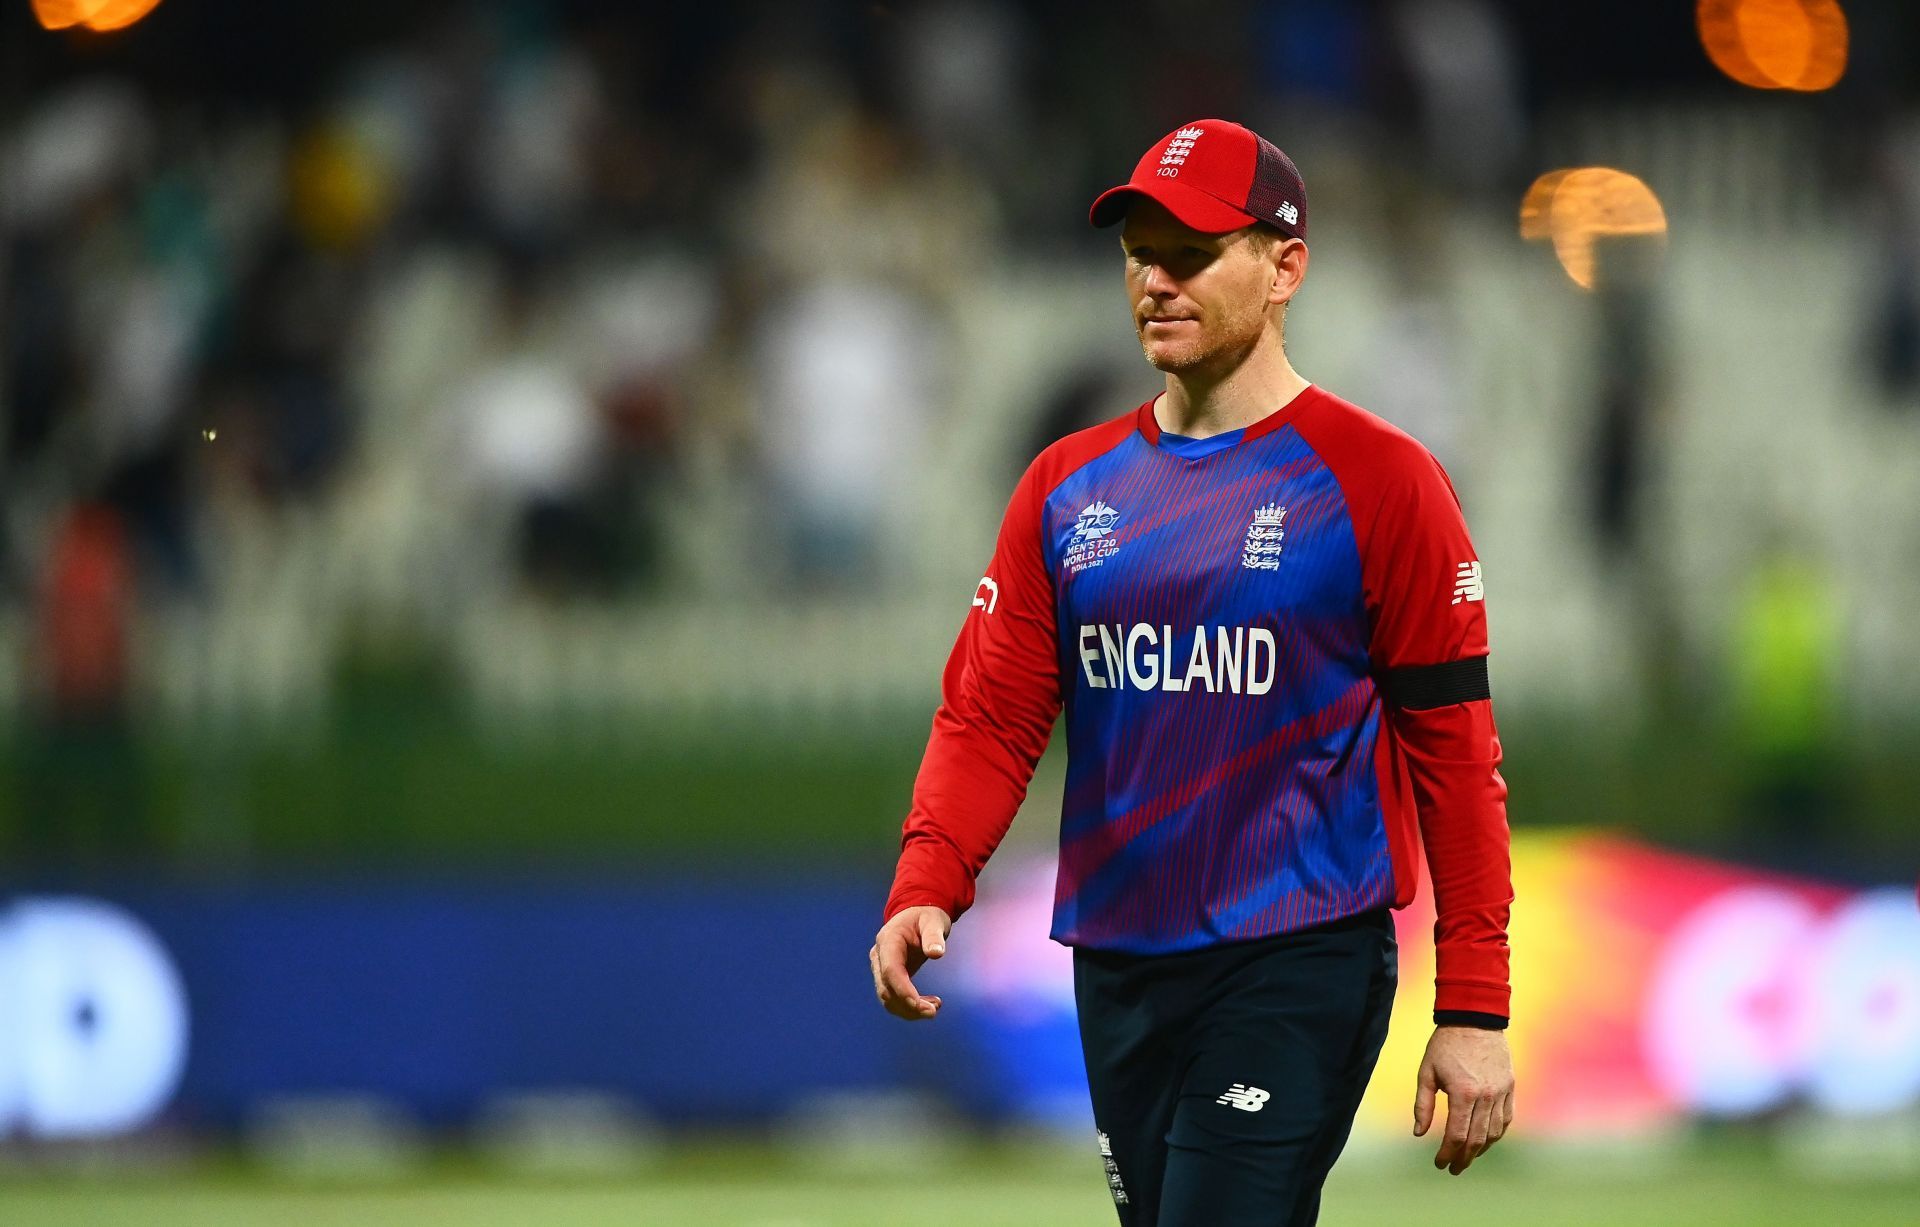 Eoin Morgan has not been retained by KKR.